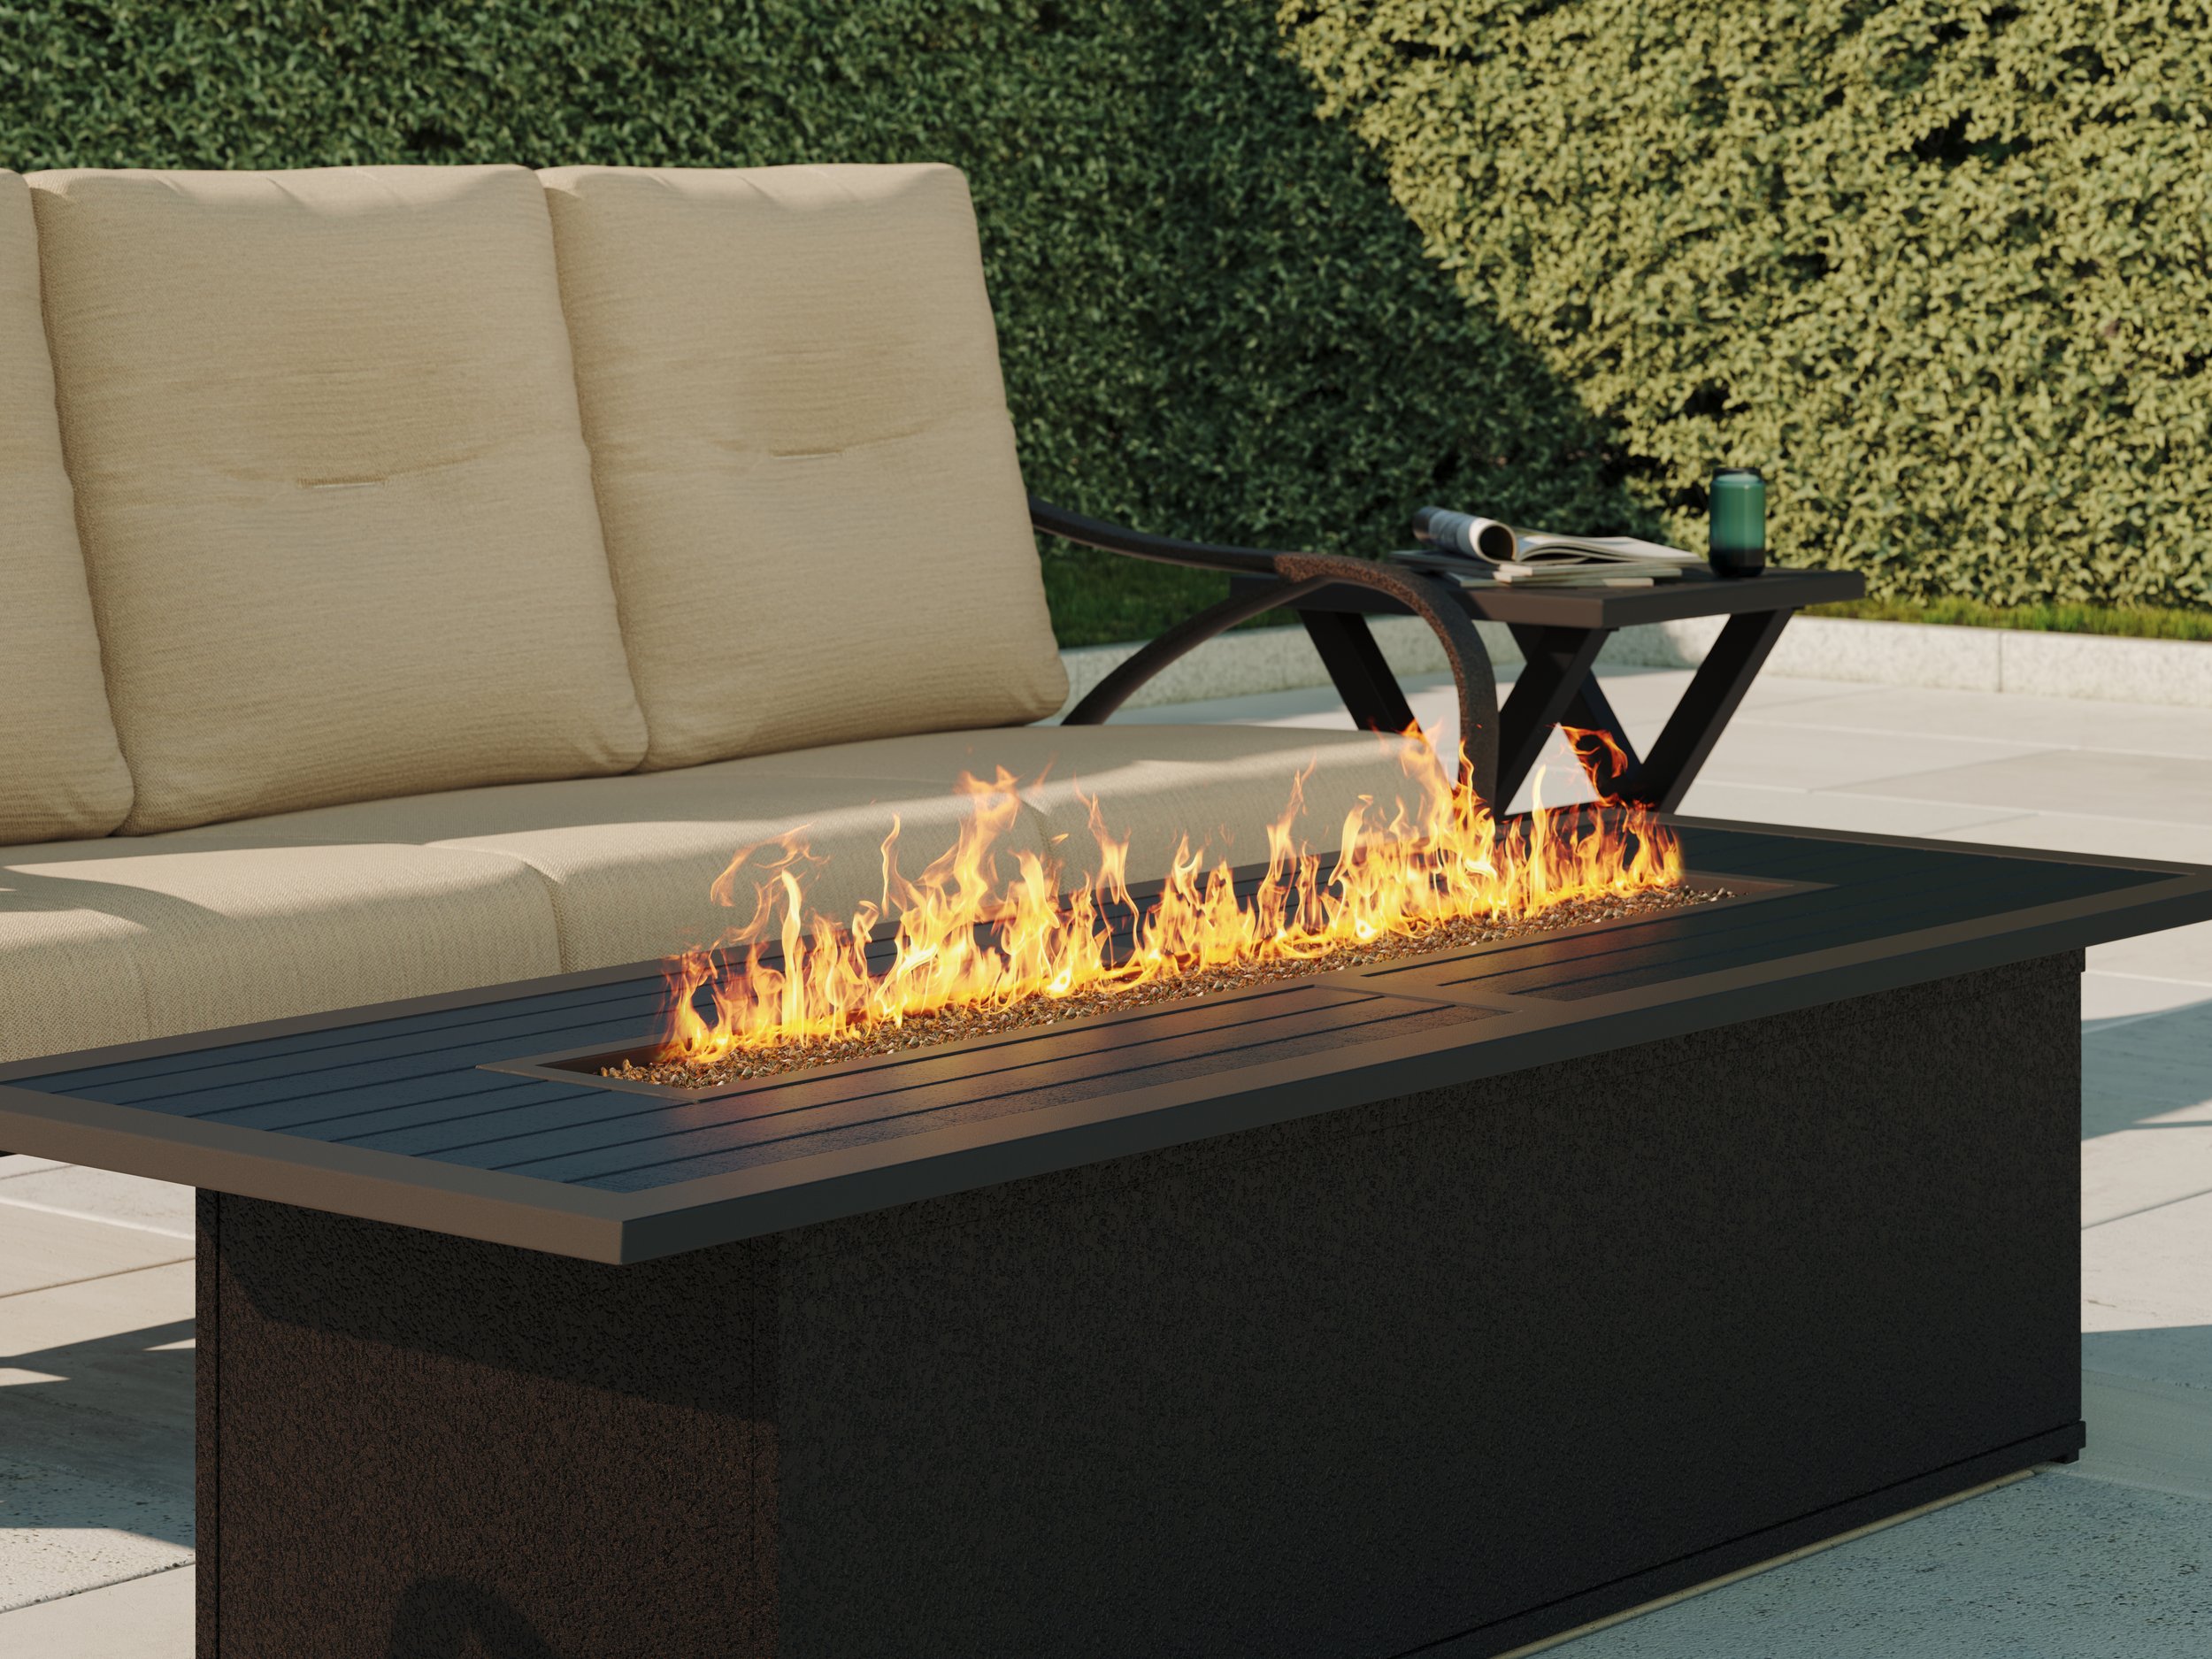 Andover_Cushion_Sofa_Crestwood_Fire_Pit_Detail.jpg